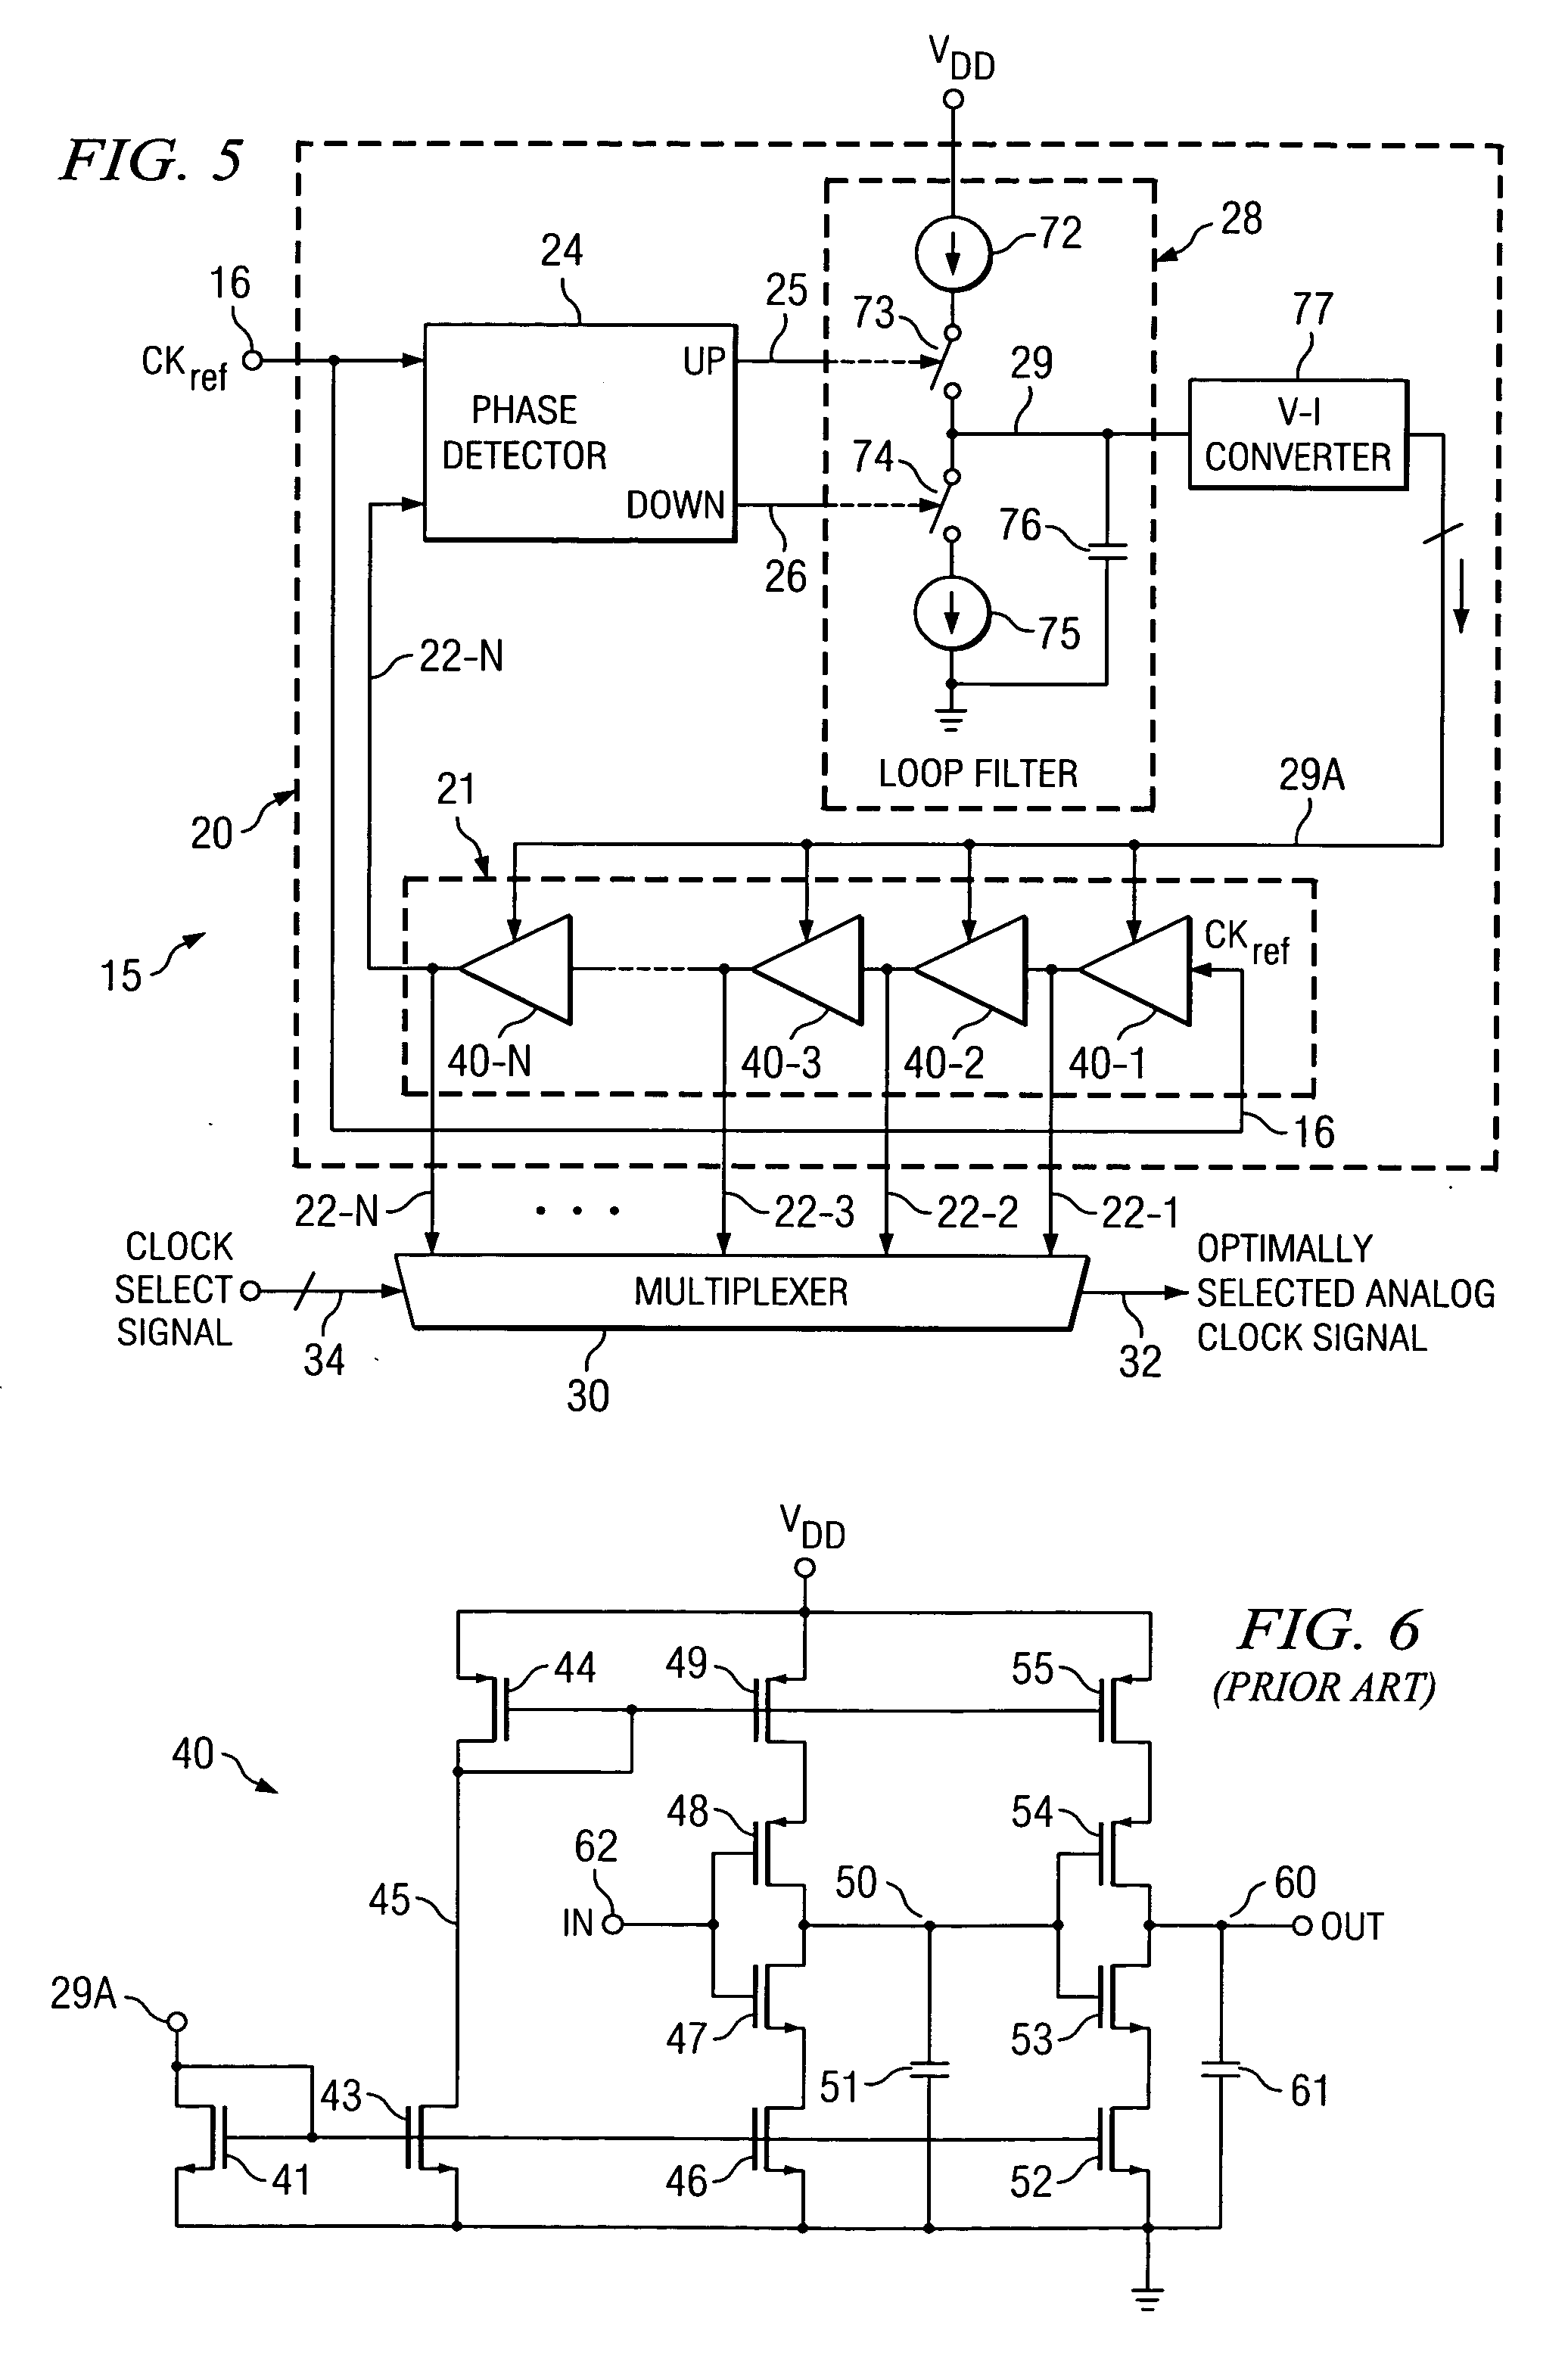 Delay locked loop circuitry and method for optimizing delay timing in mixed signal systems